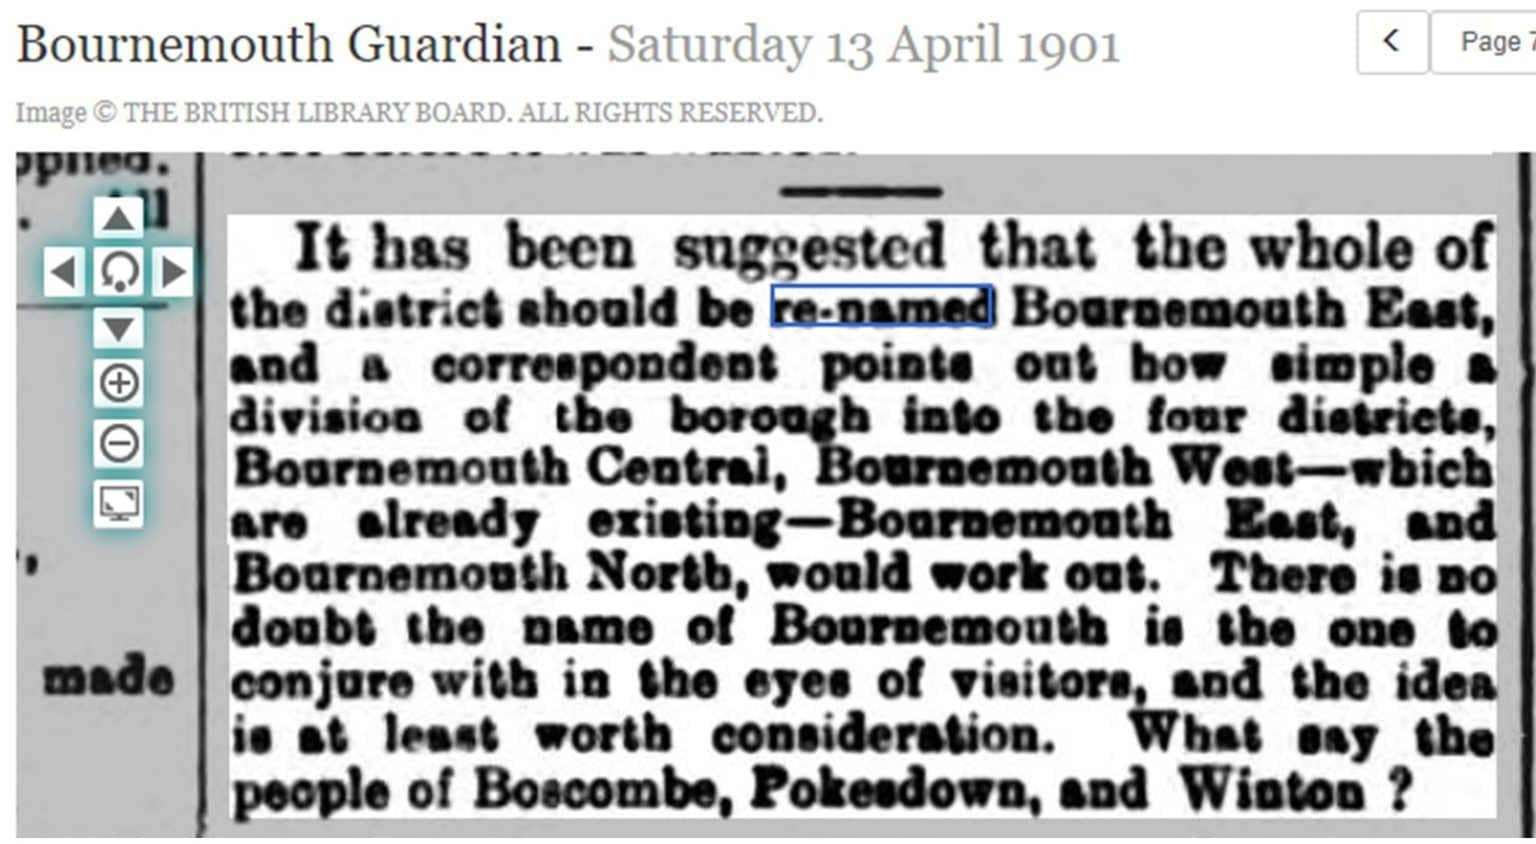 Bournemouth Guardian newspaper article 1901 suggesting Pokesdown name be changed to Bournemouth East